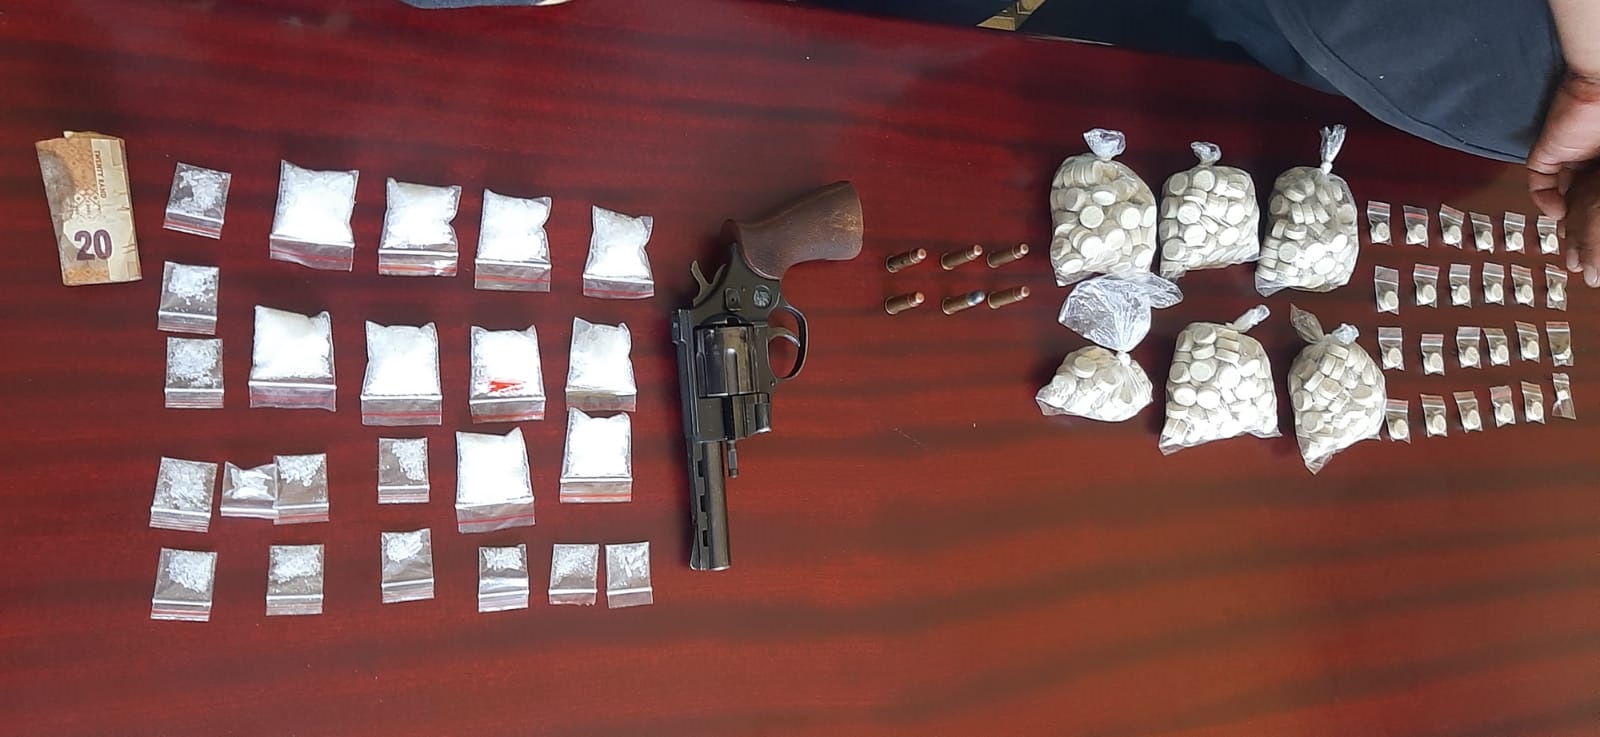 Drug clean-up leads to the discovery of an unlicensed firearm